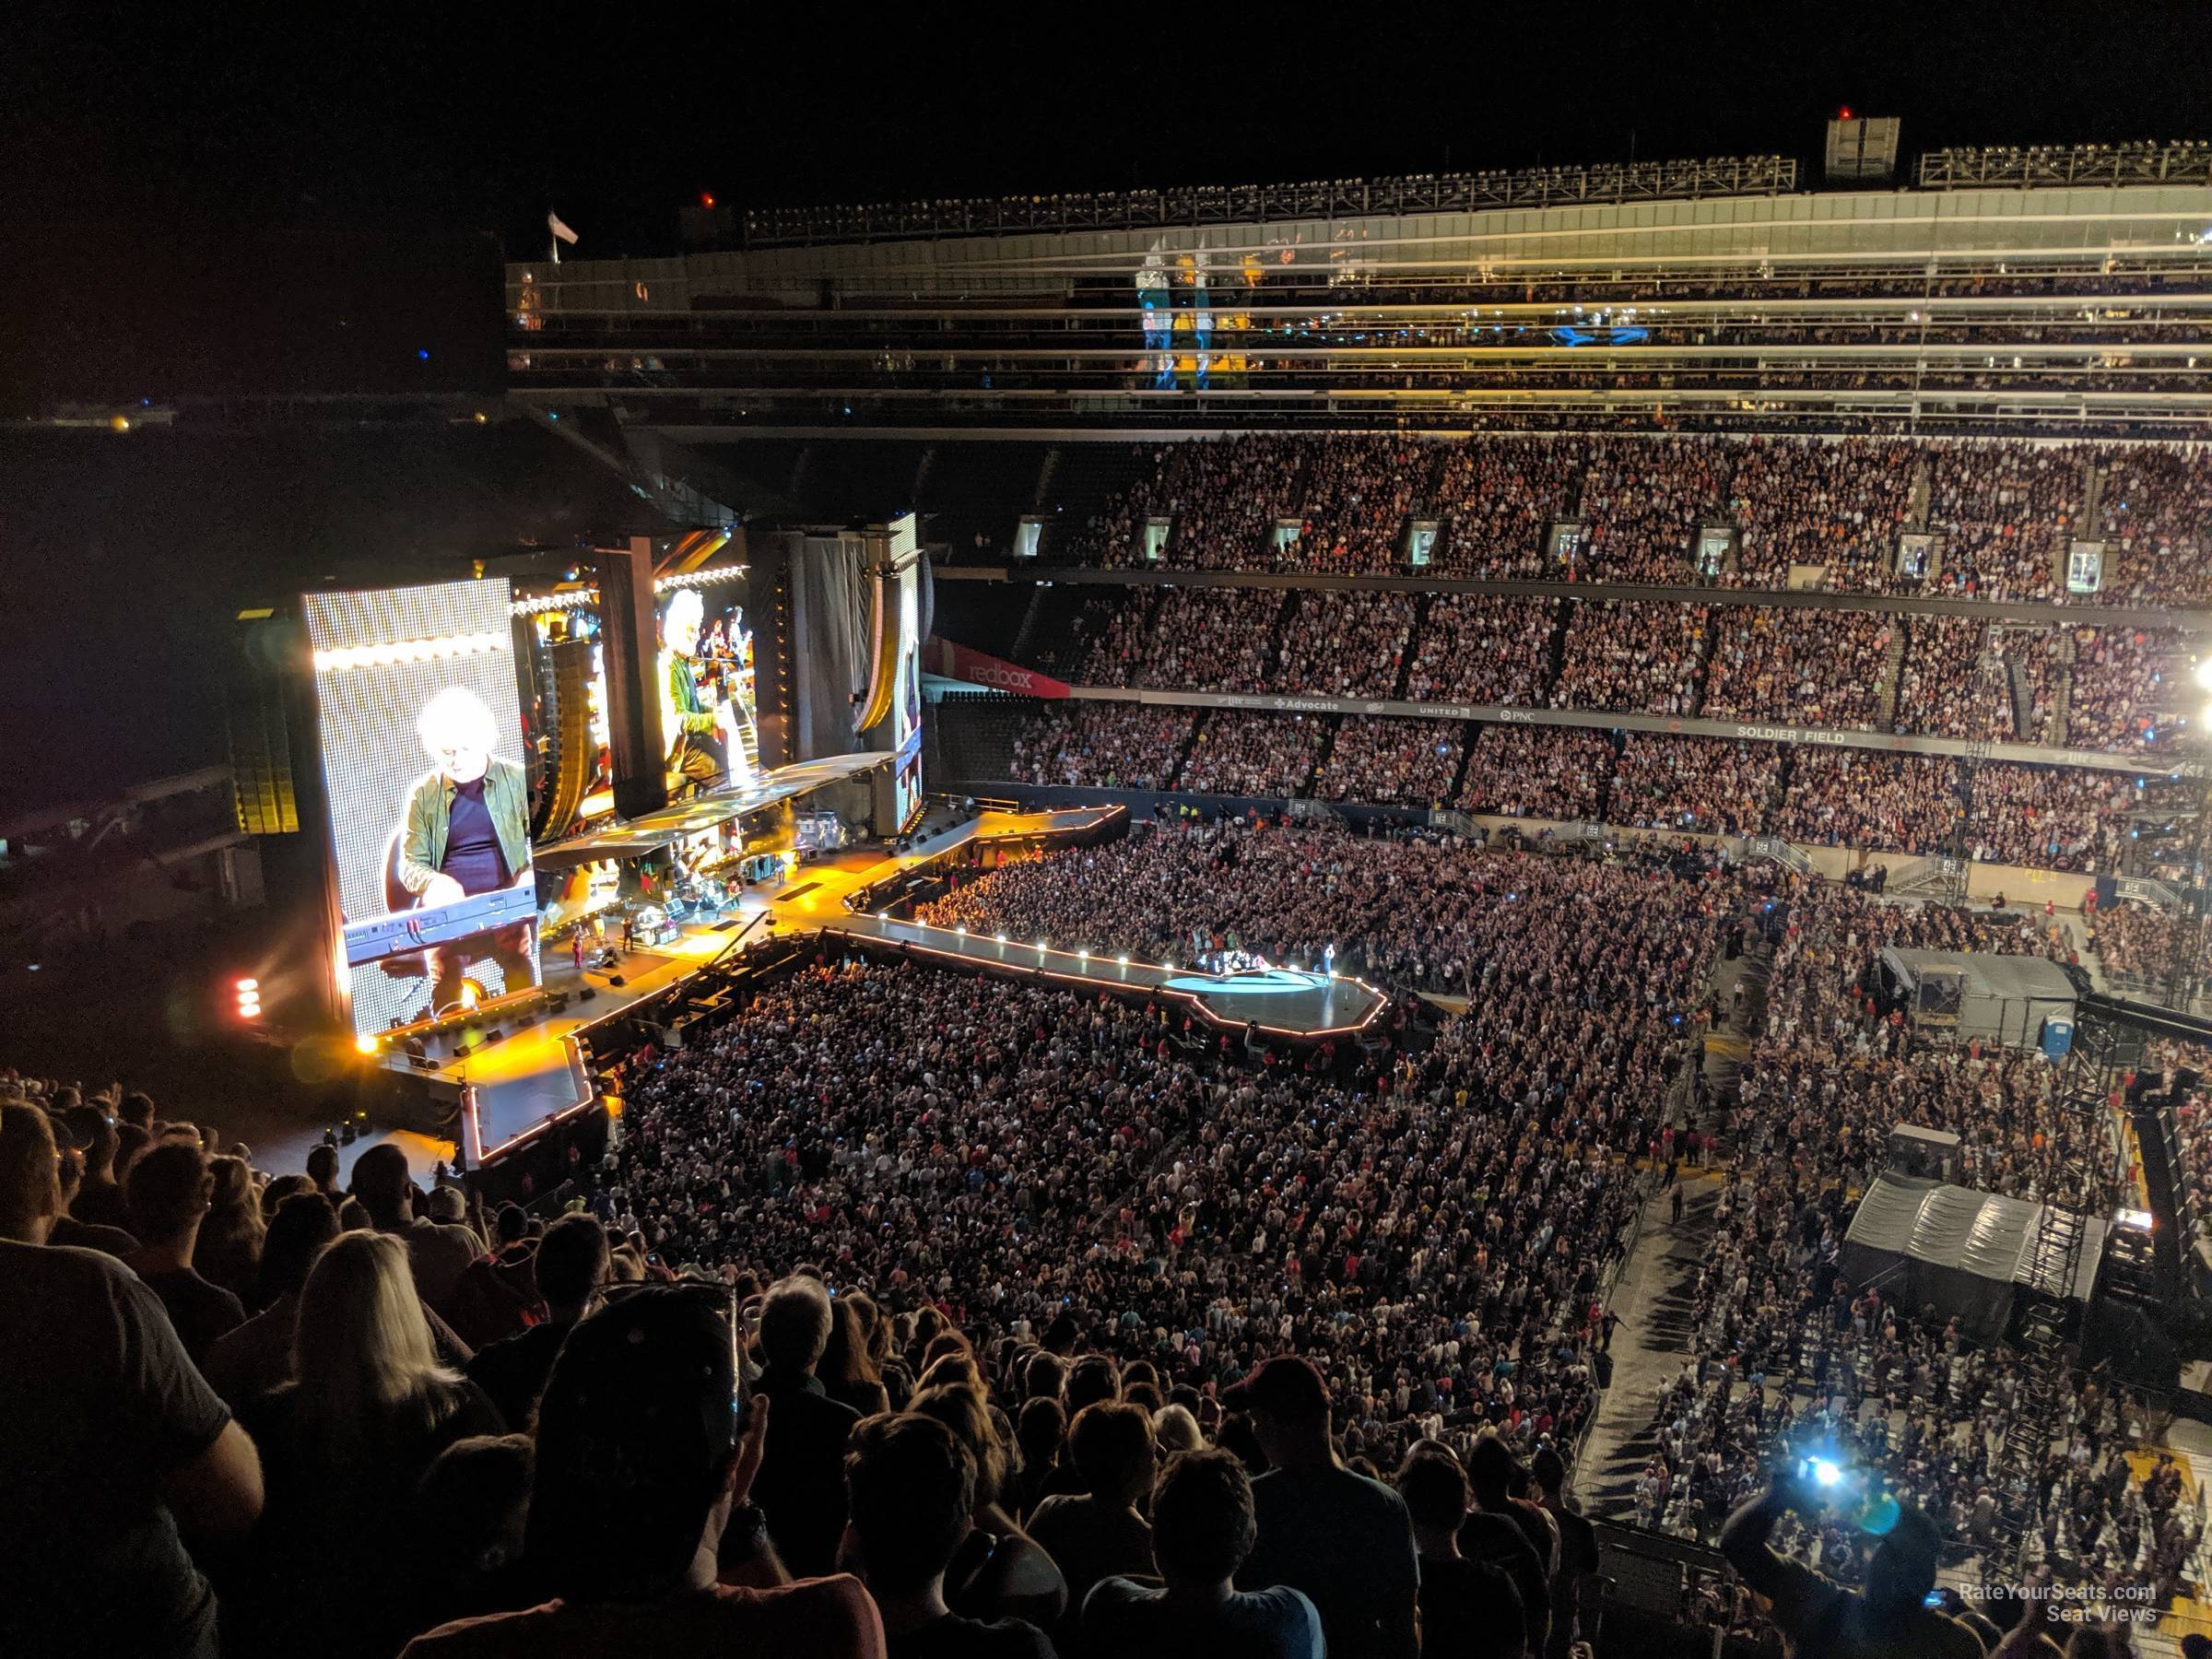 section 436, row 16 seat view  for concert - soldier field